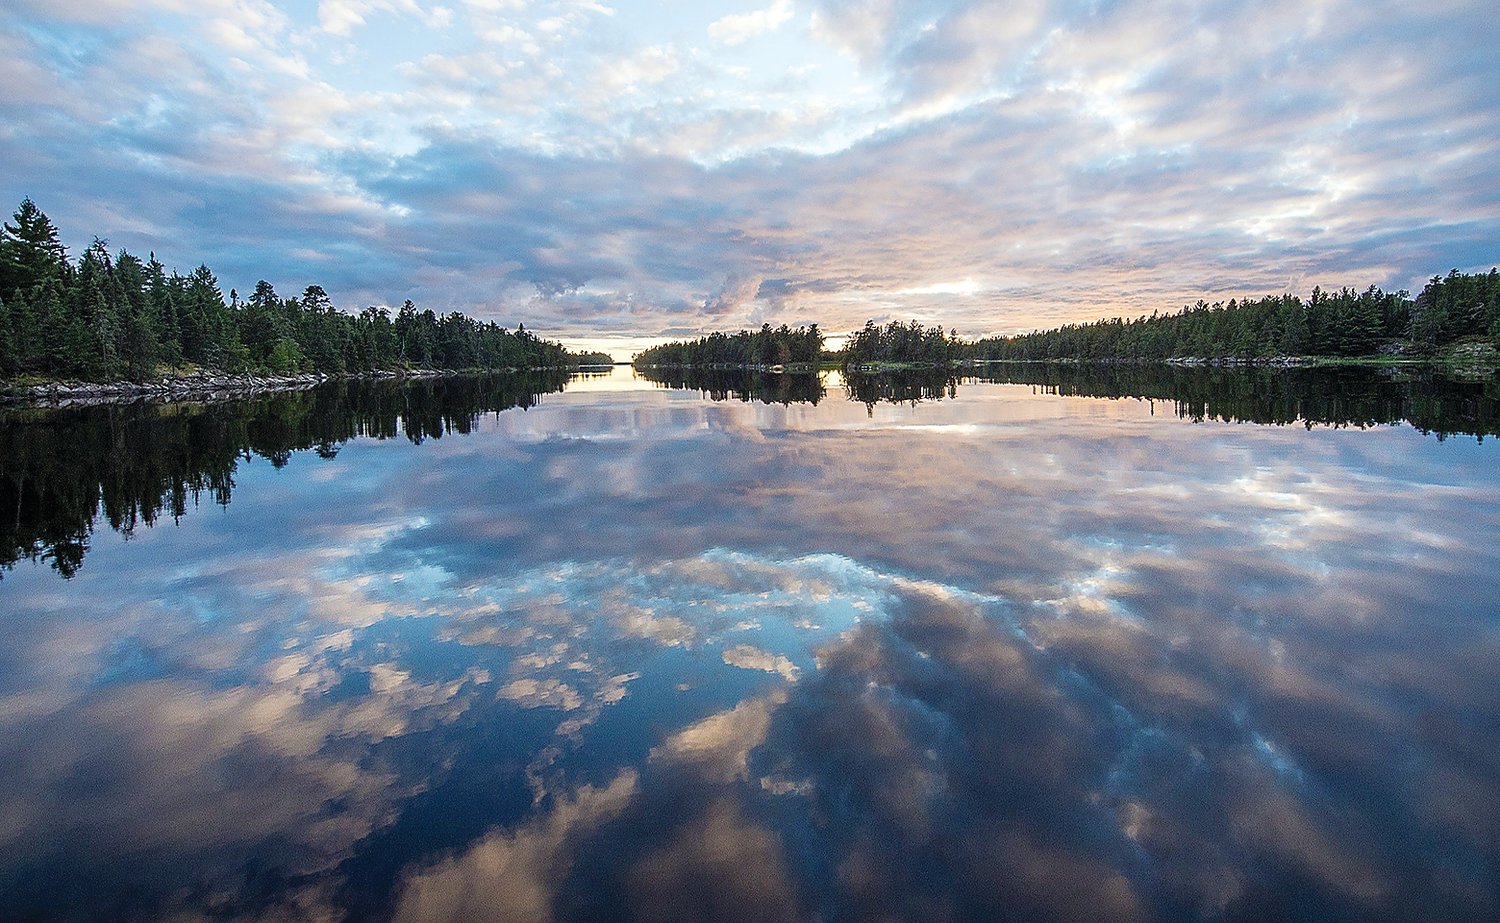 Clouds at sunset reflect in the calm waters of the Rainy River. The river has made an extraordinay comeback in terms of water quality since the introduction of environmental regulations in the 1970s.